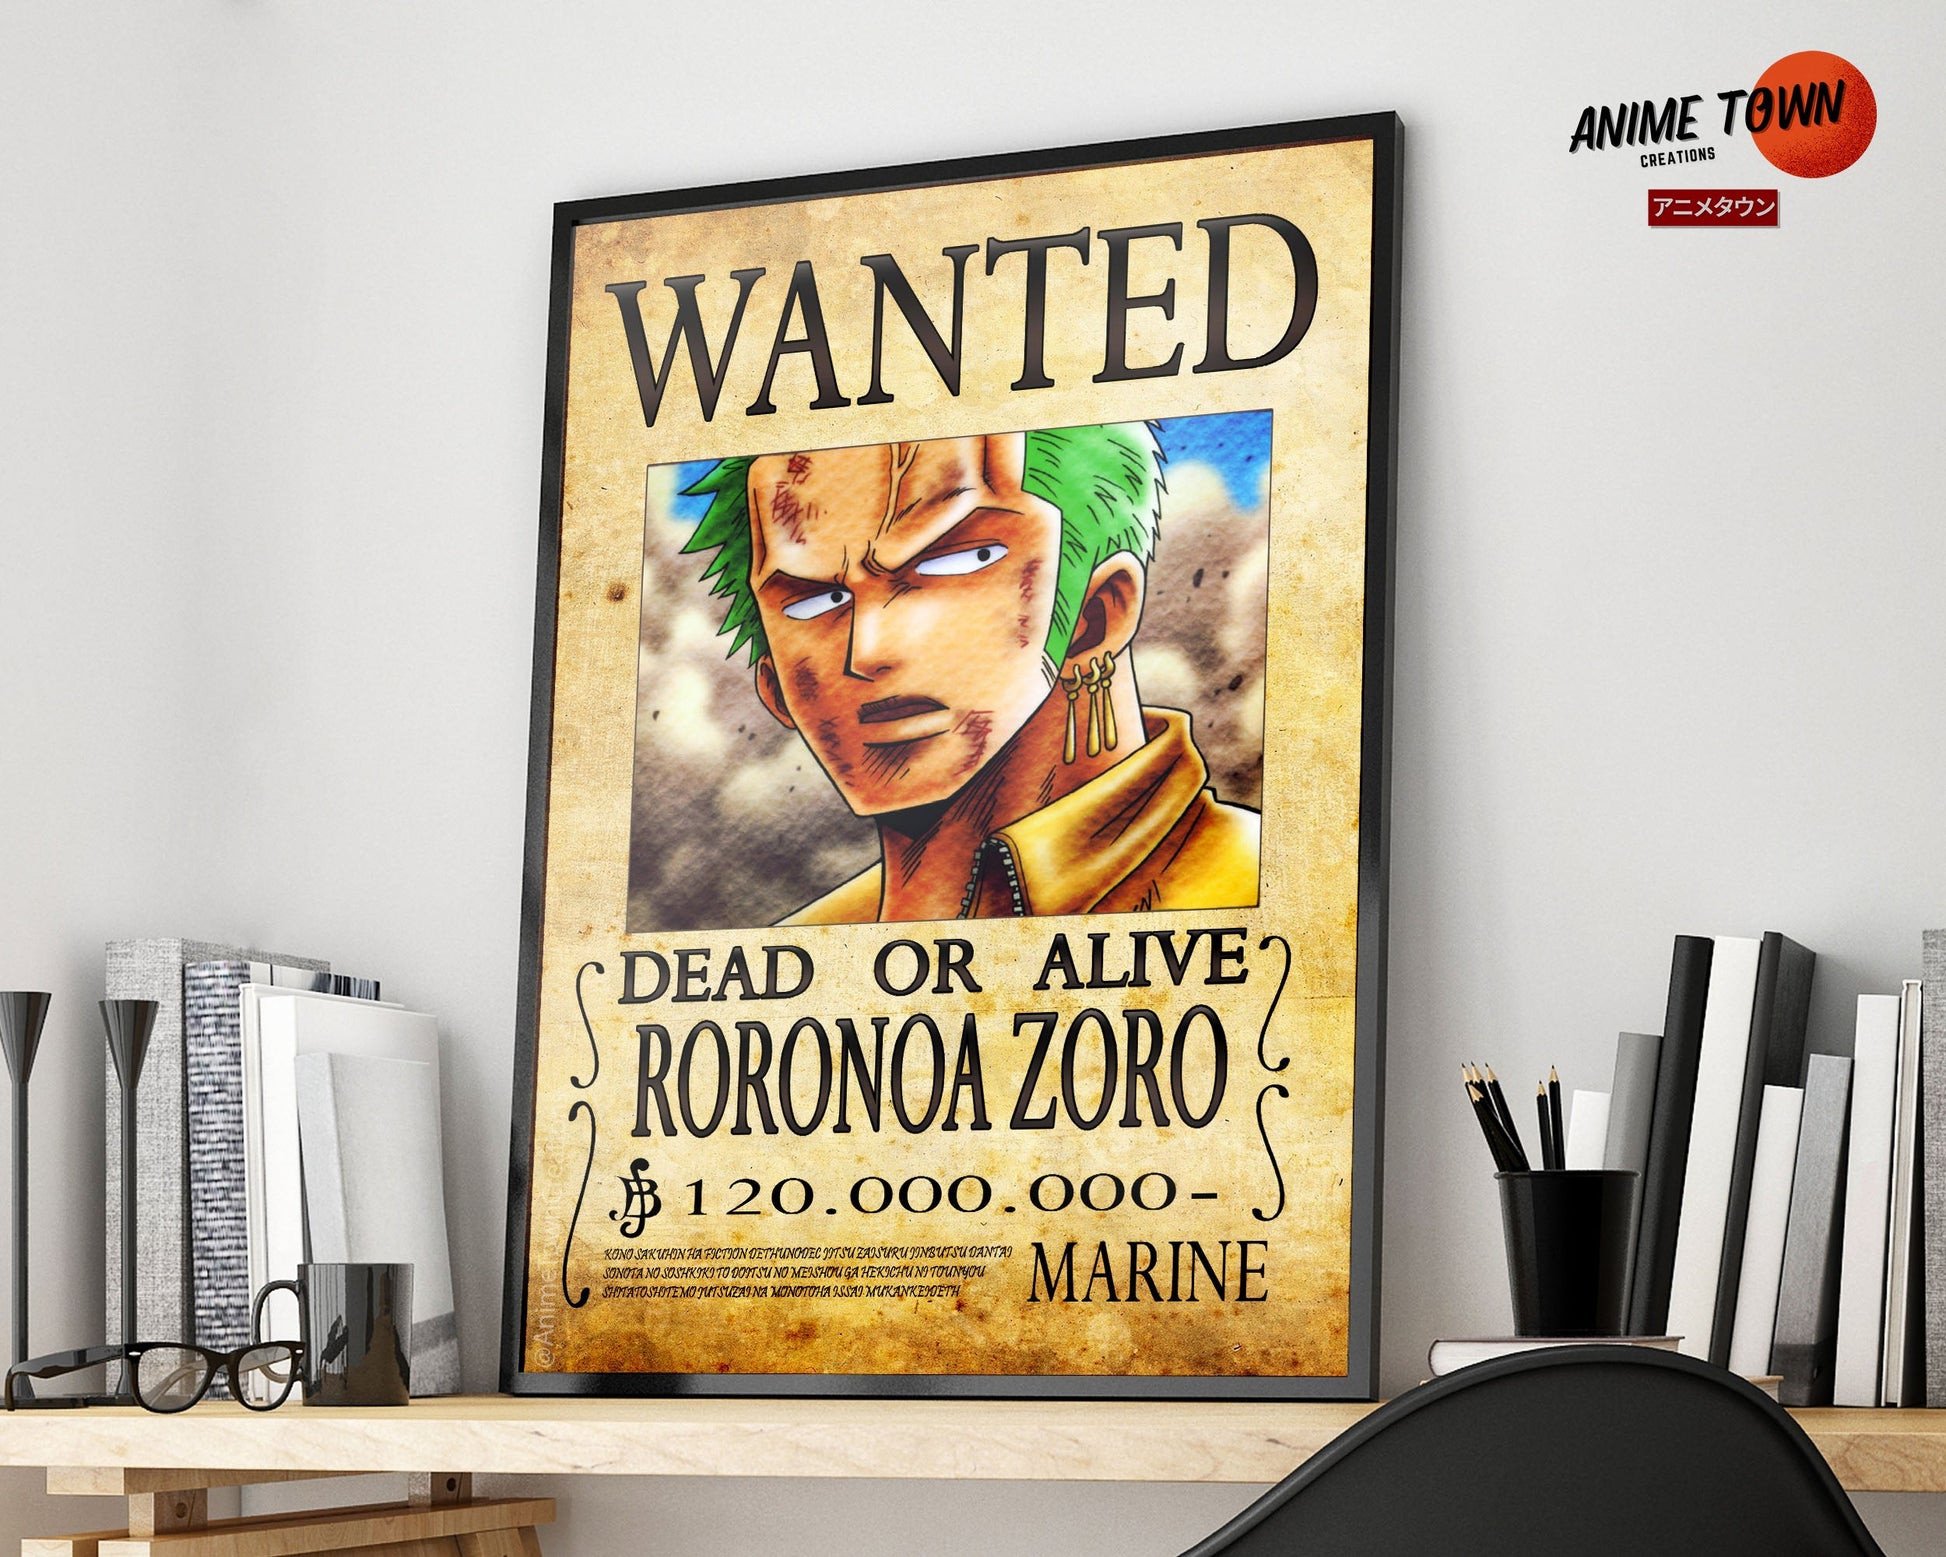 ONE PIECE WANTED: Dead or Alive Poster: Zoro ( Official Licensed